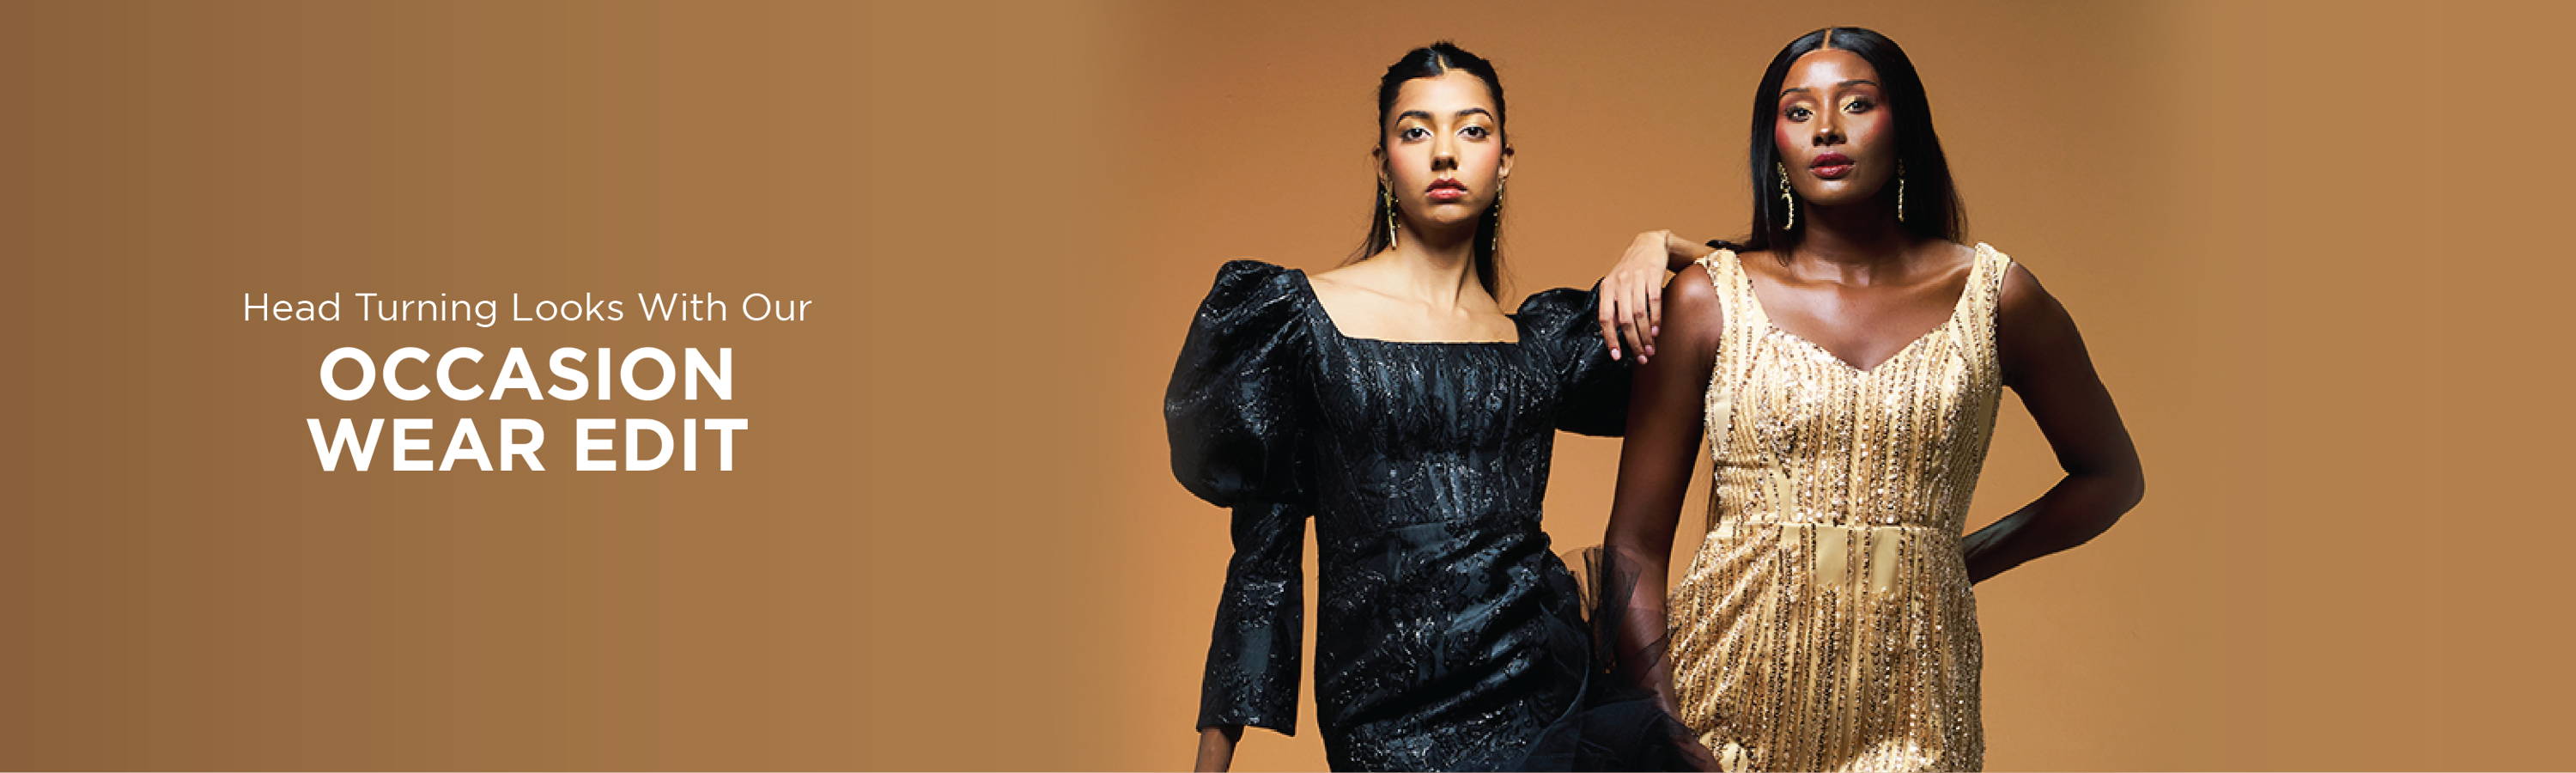 Models- Natanya Chetty in a Black Brocade and Tulle Midi-Dress by AFI Privé with Model Poppy Xaba in a beaded gold mini-dress by AFI Privé. They are standing in front of a bronze backdrop.